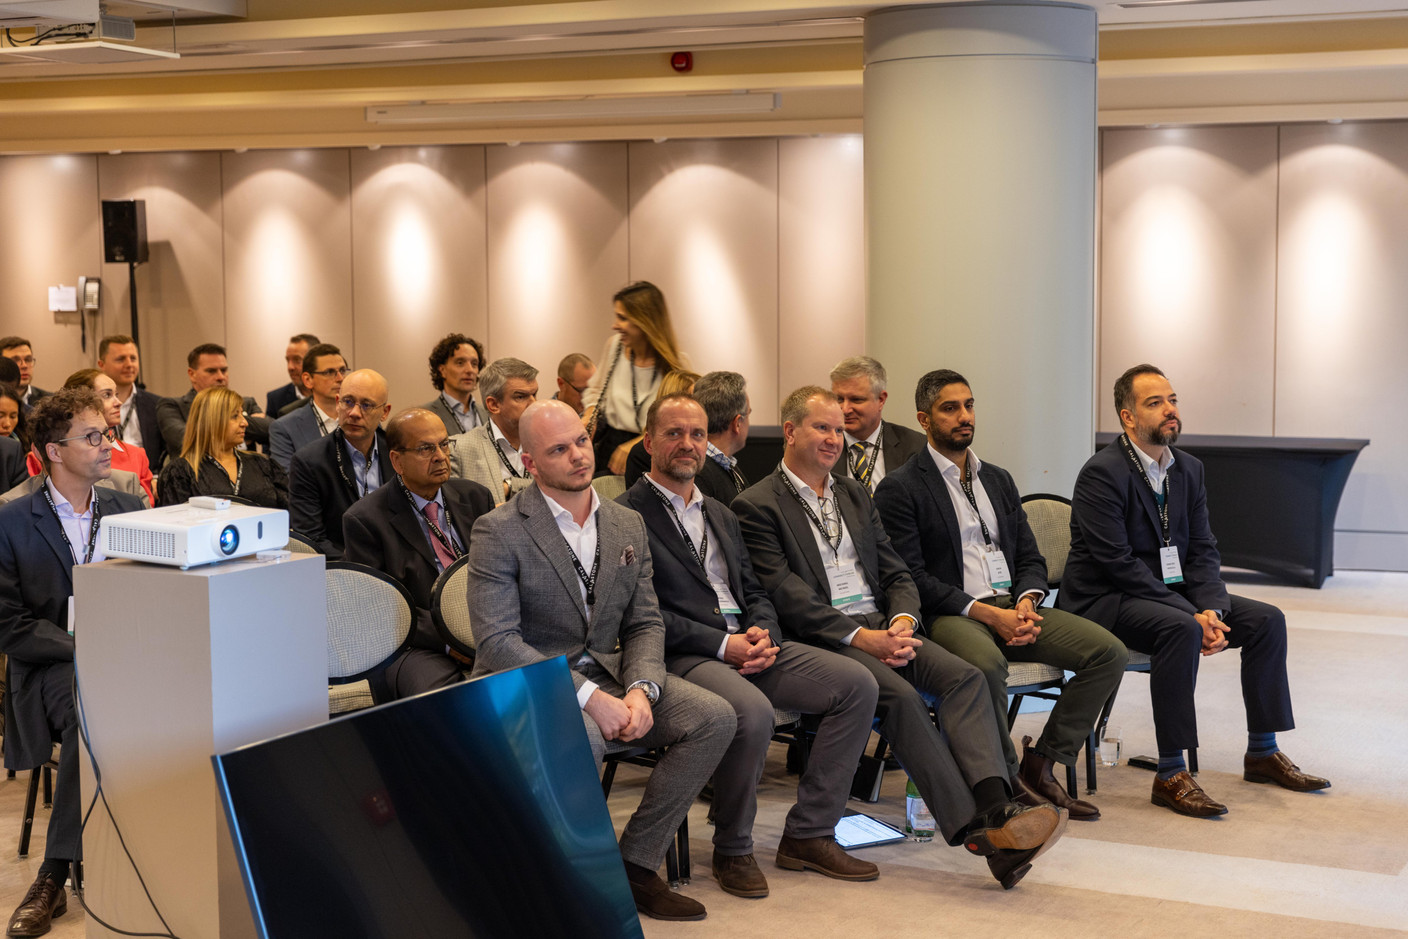 Ross Fox, Dave McGuinness, Michael Neil, Varun Atre and Pierre-Eric Patricola (all from Calastone) in the front row, at the annual Calastone Connect Forum, which was held on 7 November 2023 at the Sofitel in Kirchberg. Photo: Romain Gamba/Maison Moderne